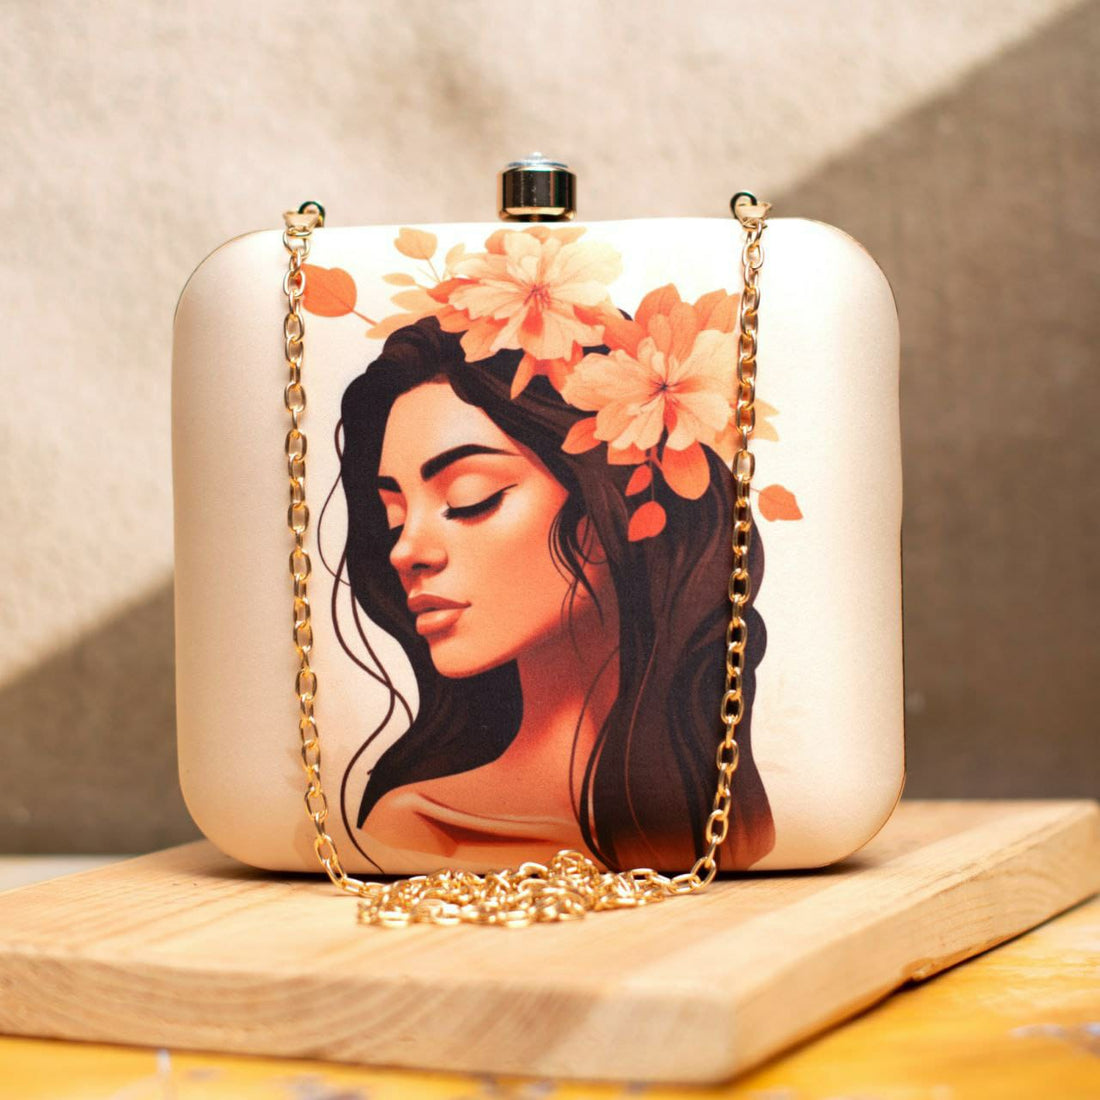 Woman with Flower Printed Square Handmade Clutch - 1.1